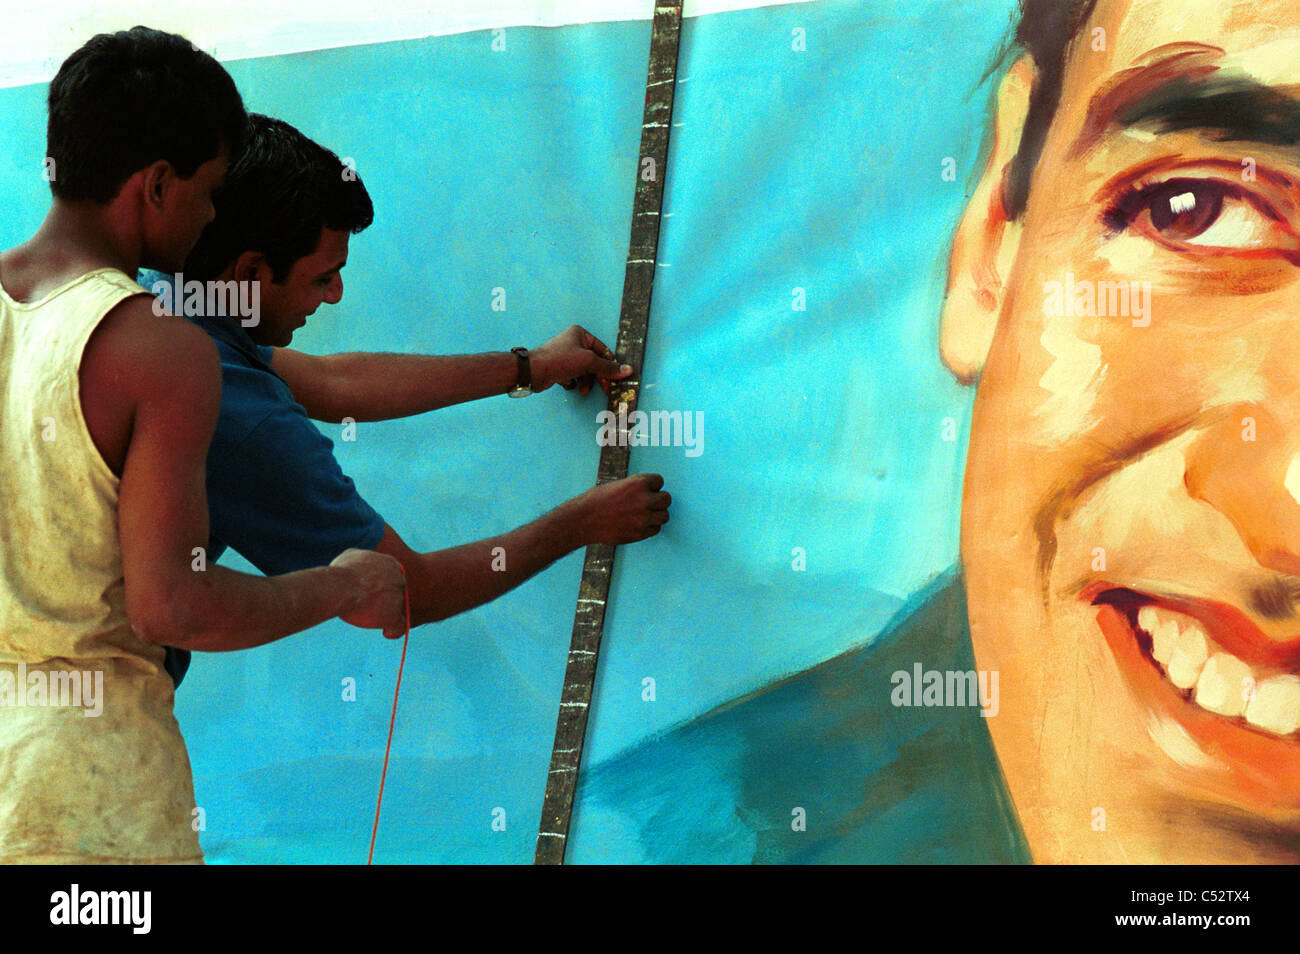 INDIA, Mumbai Bombay, Ellora Arts film hoarder, artists paint large wall posters as advertisement for new Bollywood movie releases at cinemas Stock Photo